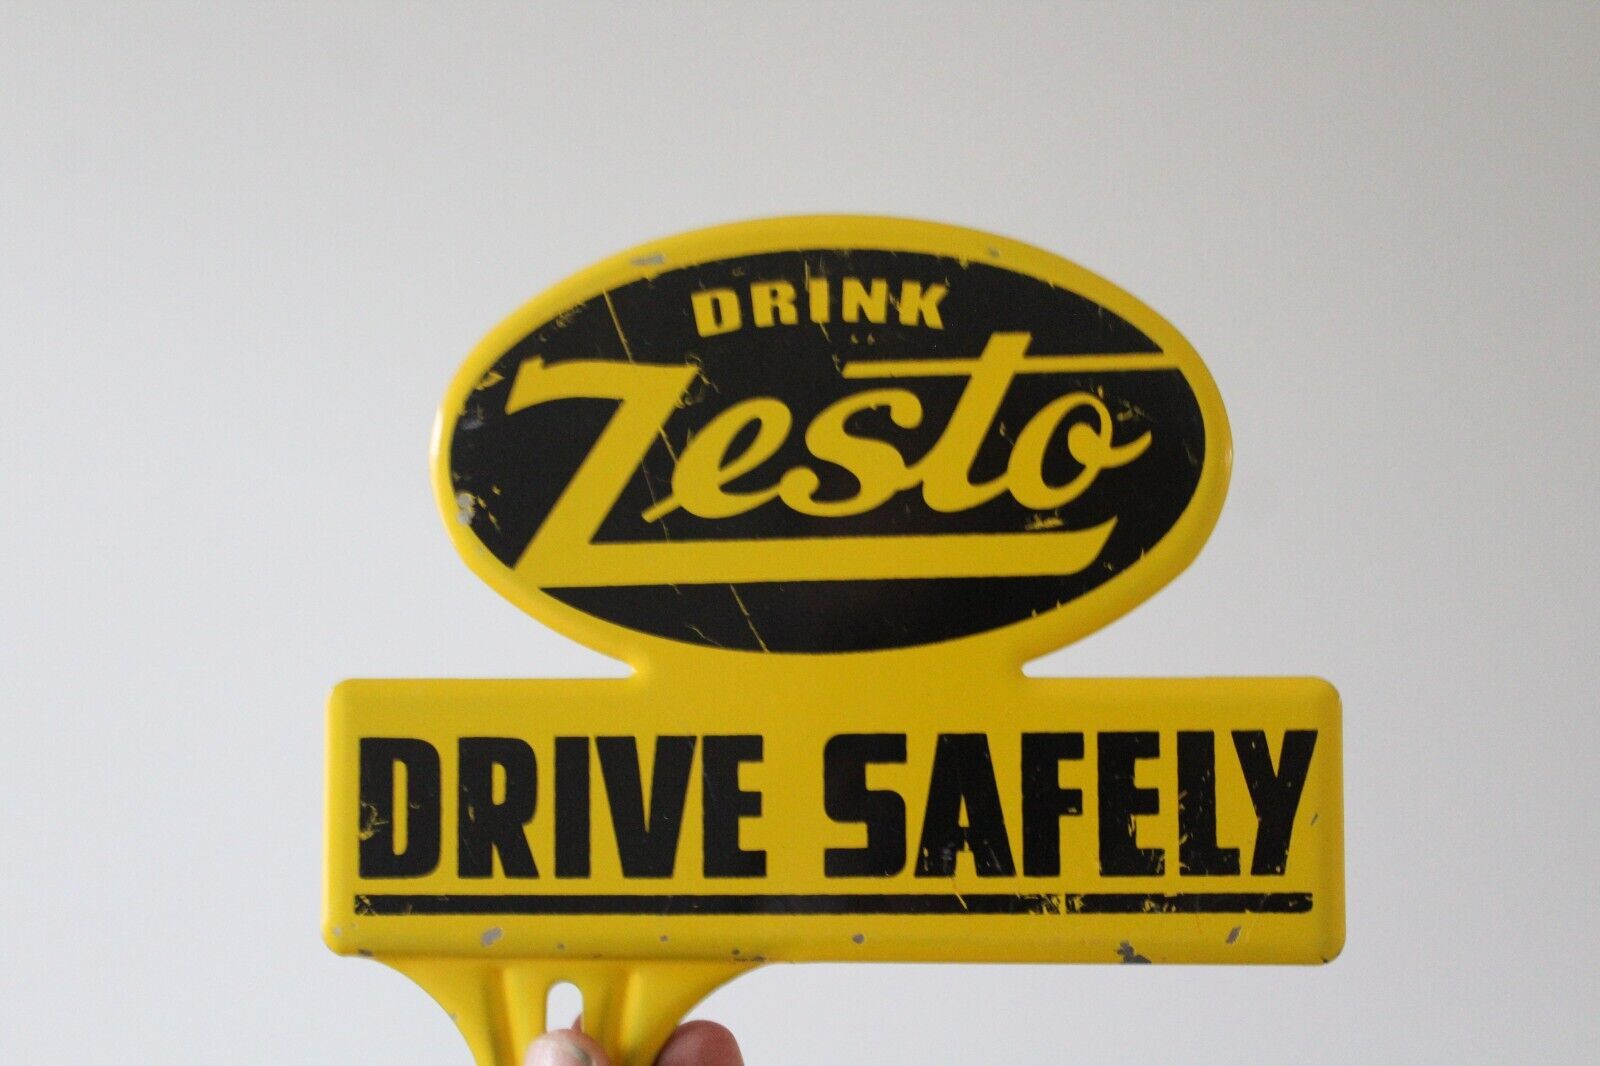 1950s DRINK ZESTO DRIVE SAFELY STAMPED PAINTED METAL TOPPER SIGN COKE SODA